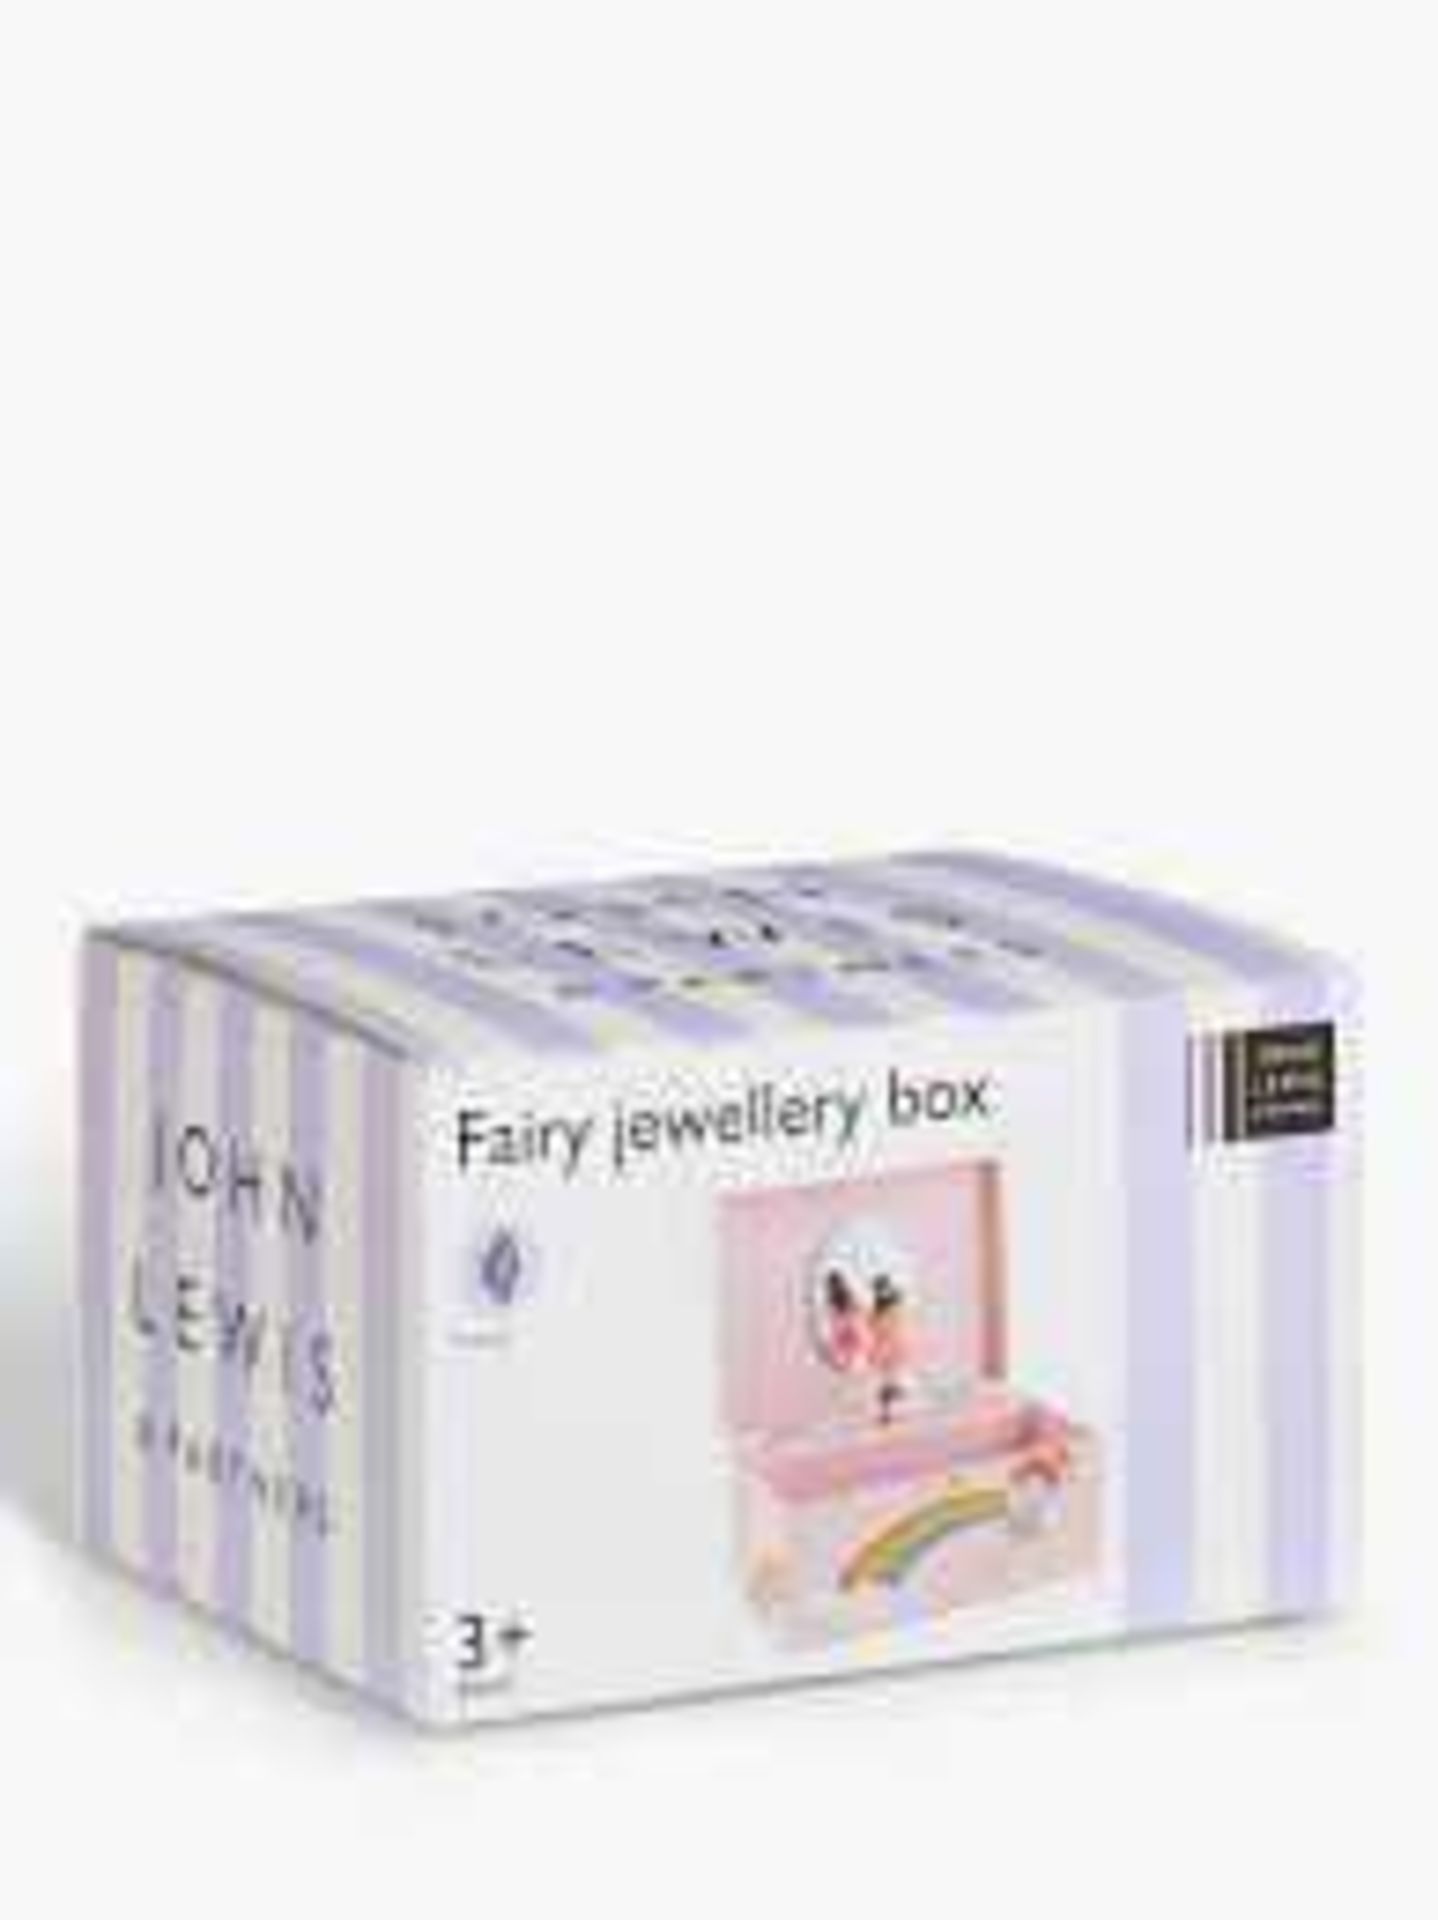 RRP £10 - £15 Each Boxed John Lewis Children's Toys To Include Jewellery Boxes & My First Doll - Image 3 of 3